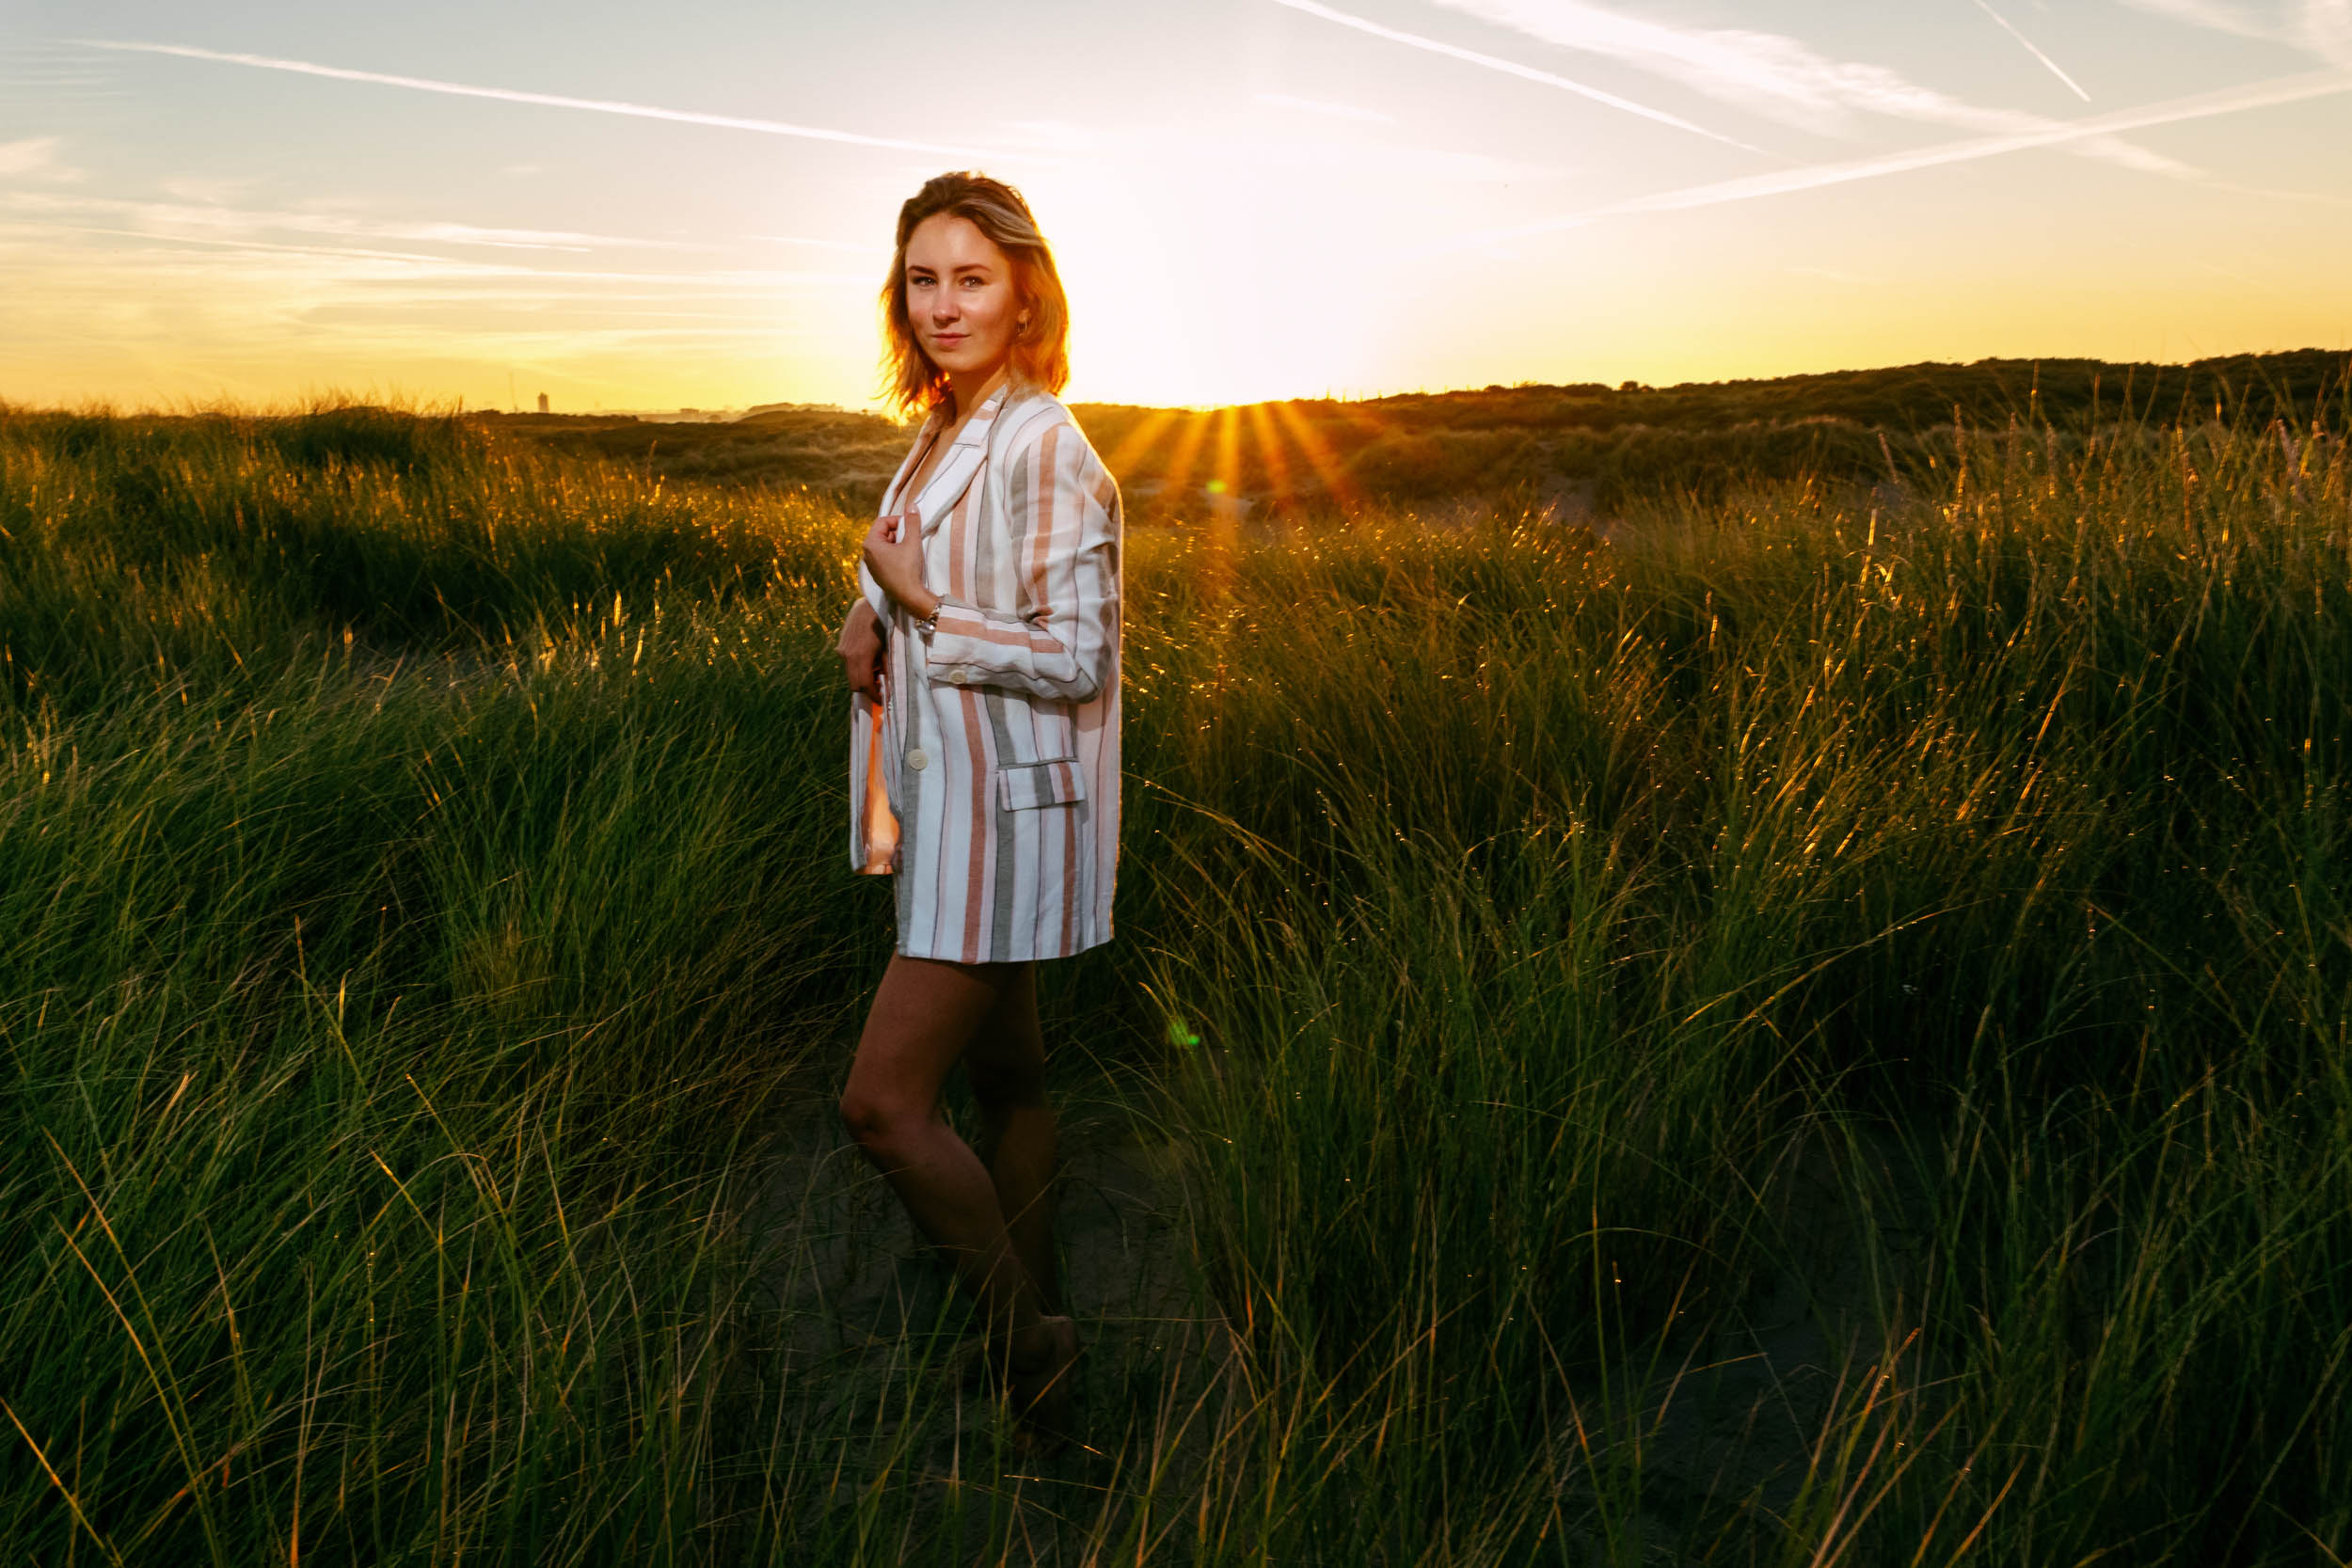 A woman in a striped dress standing in tall grass at sunset.